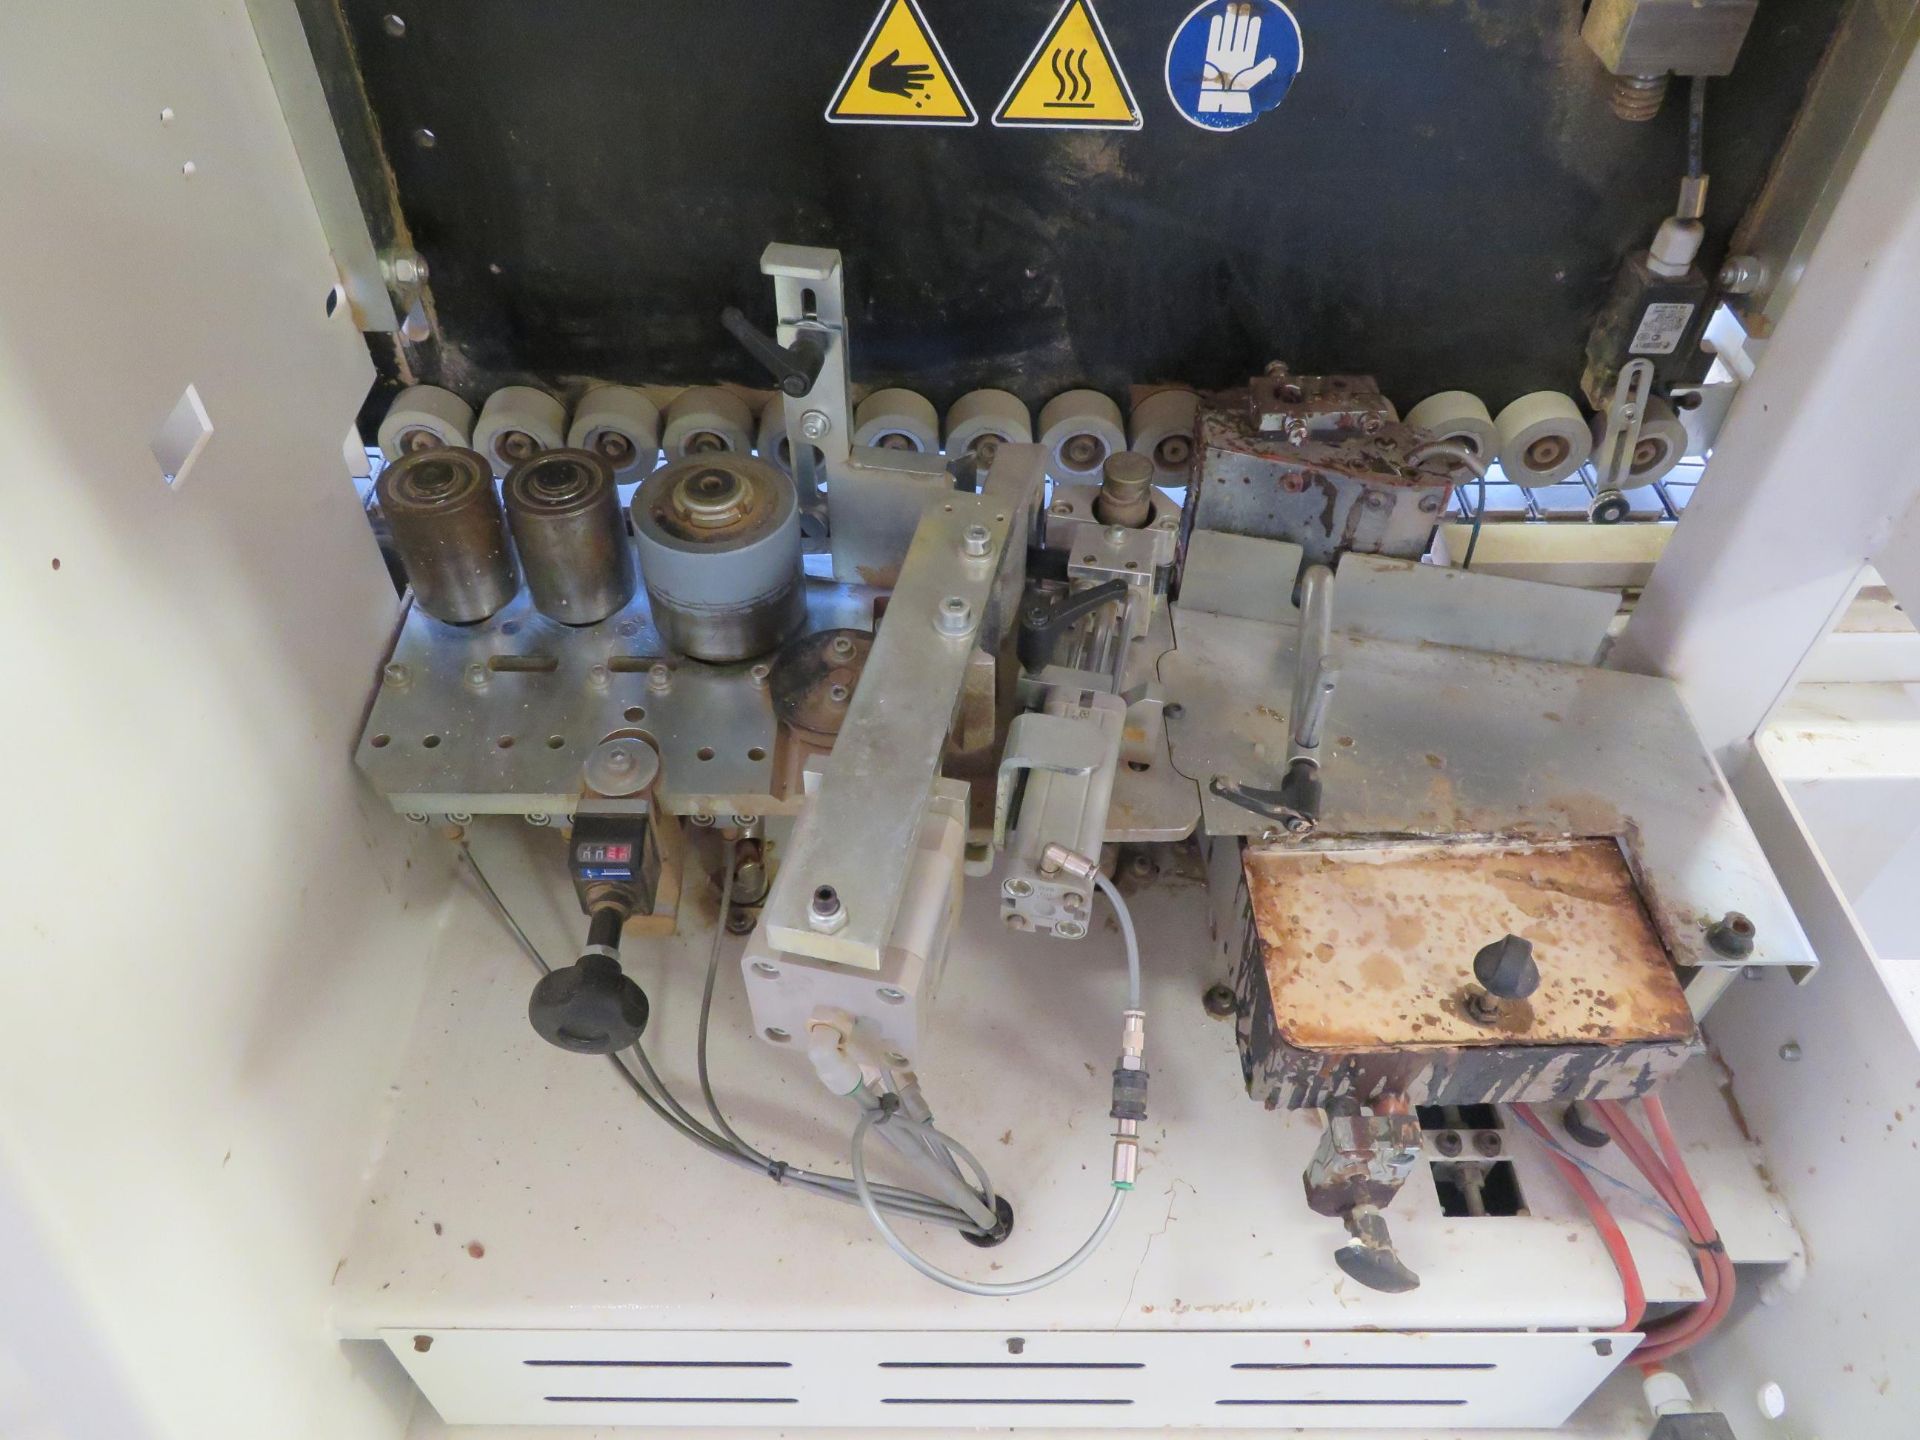 SCM automatic edge bander, Mod# OLIMPIC K 400 (2013), 220 Volts, 3 phase, 60 HZ with BEMAG 15 KVA - Image 6 of 13